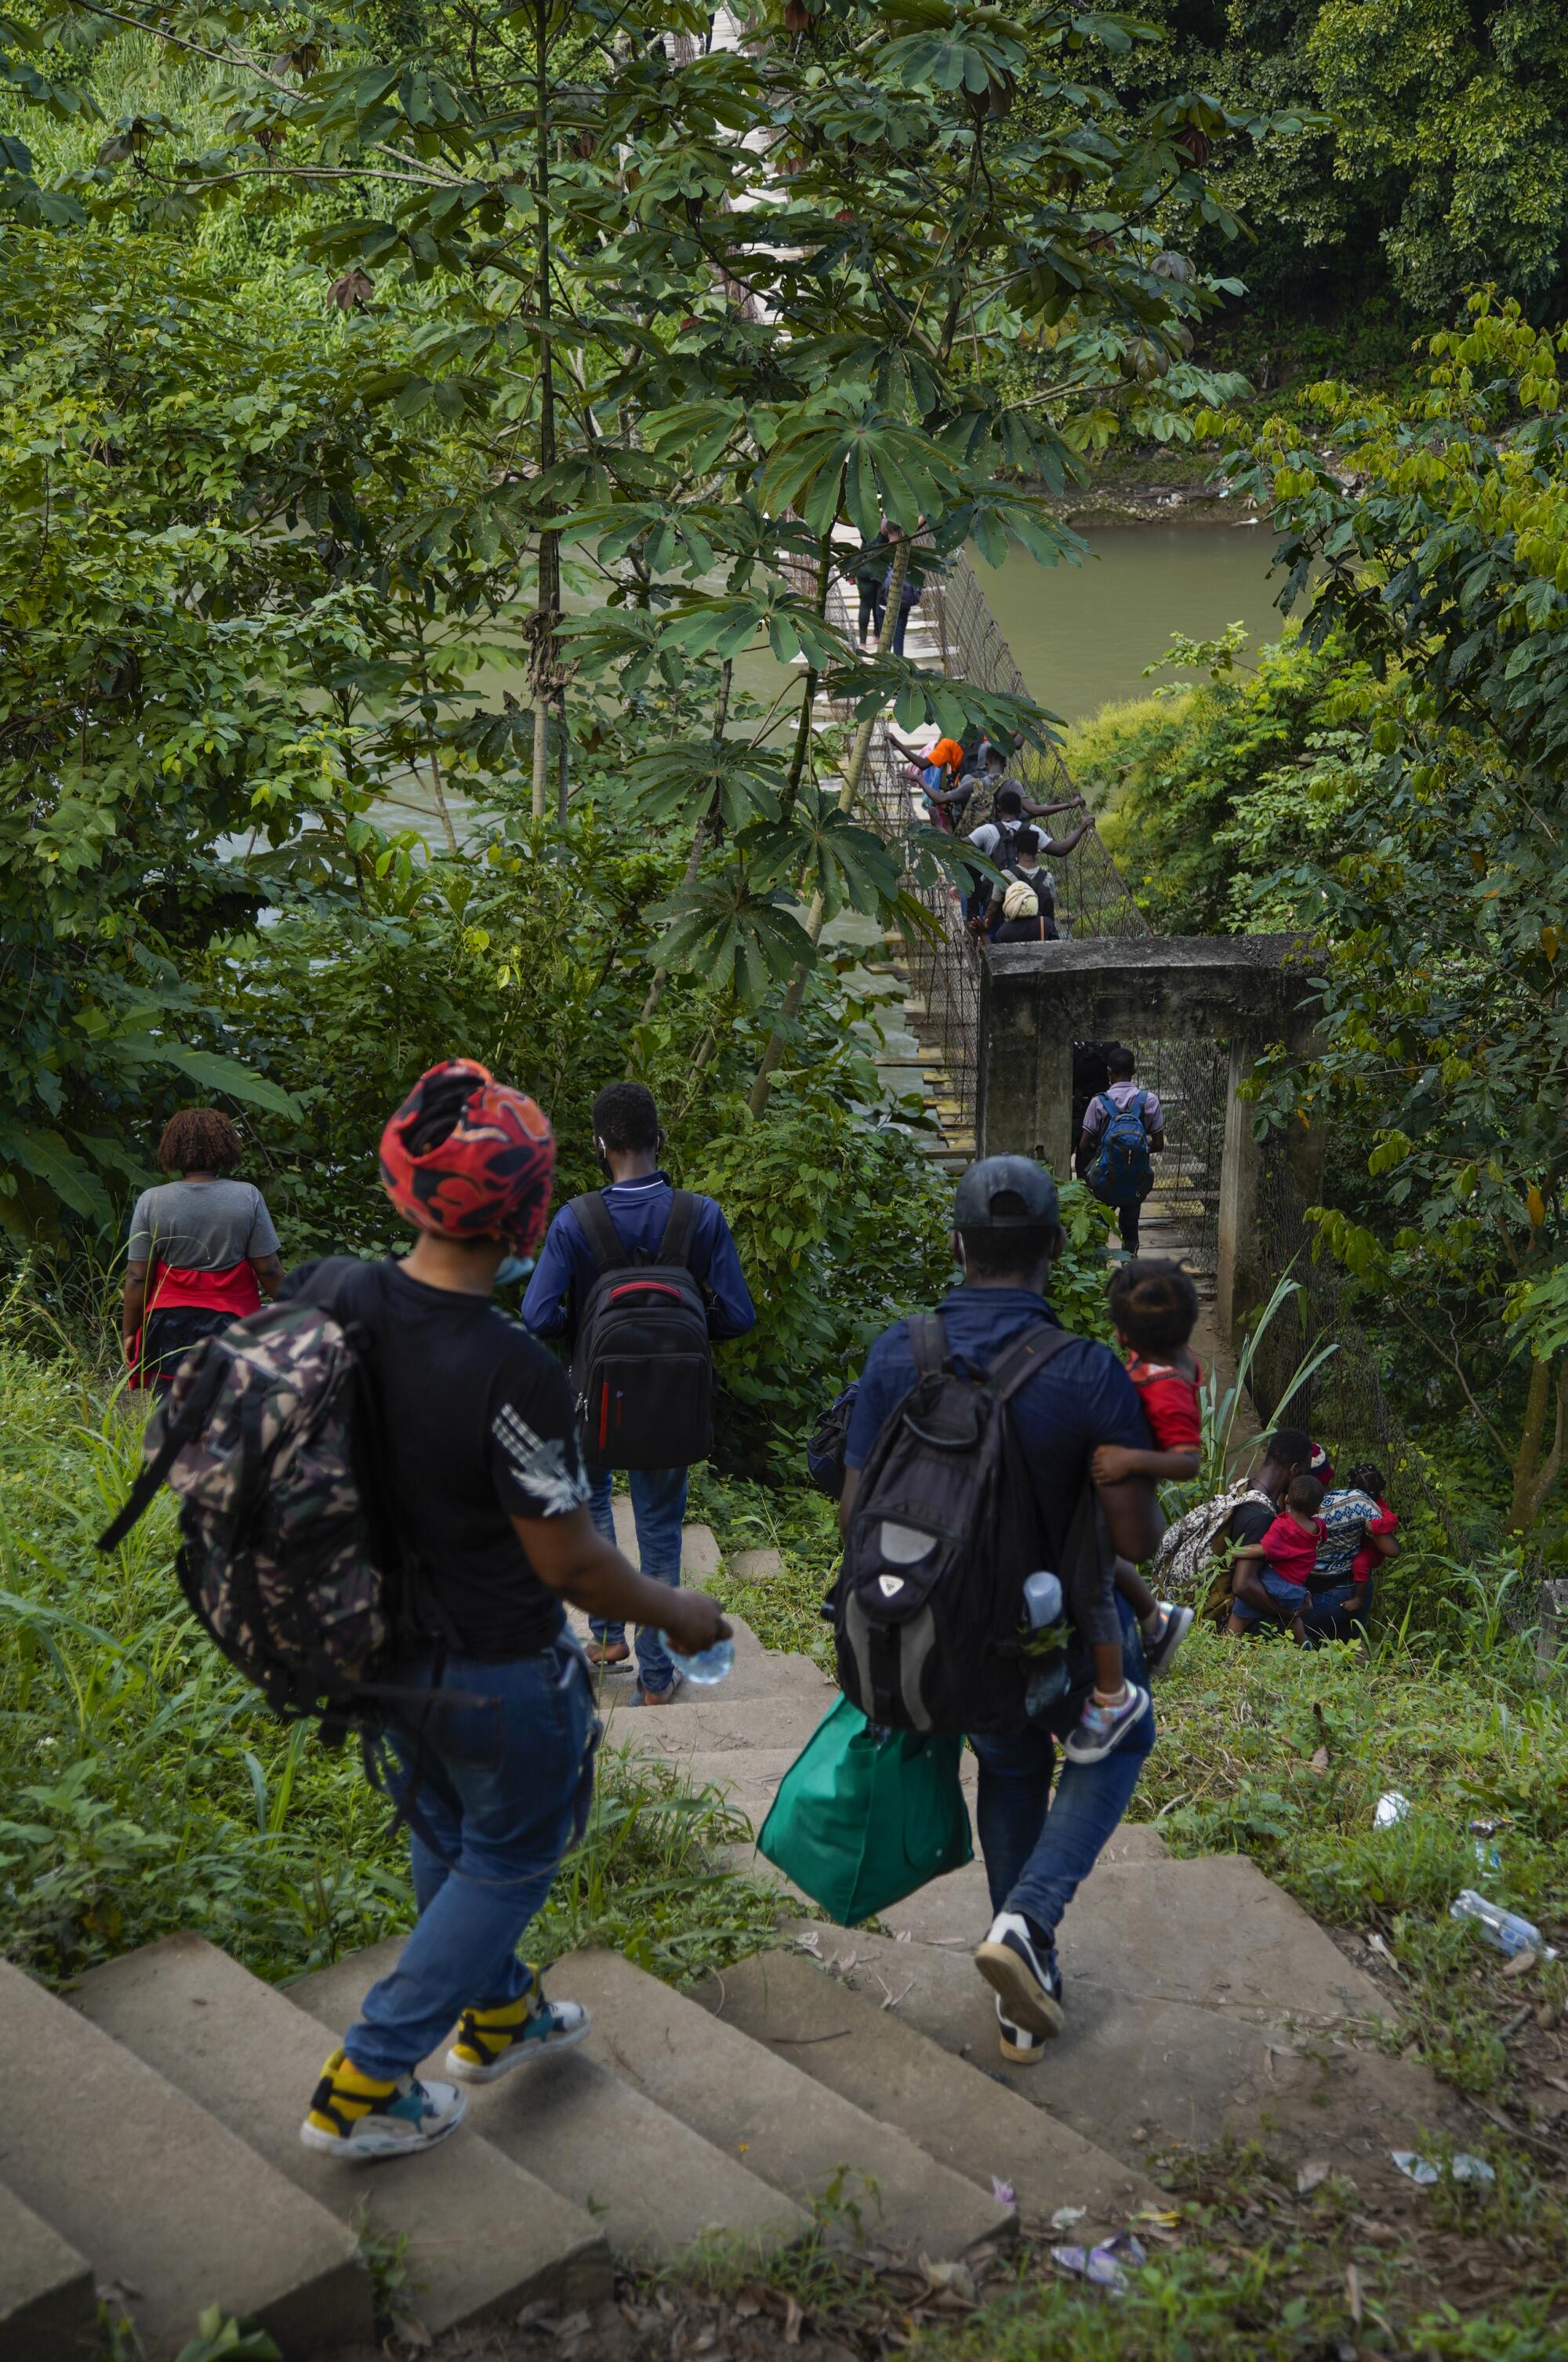 A group of Haitian migrants following smugglers' instructions cross the Cahoacán river on a rickety bridge